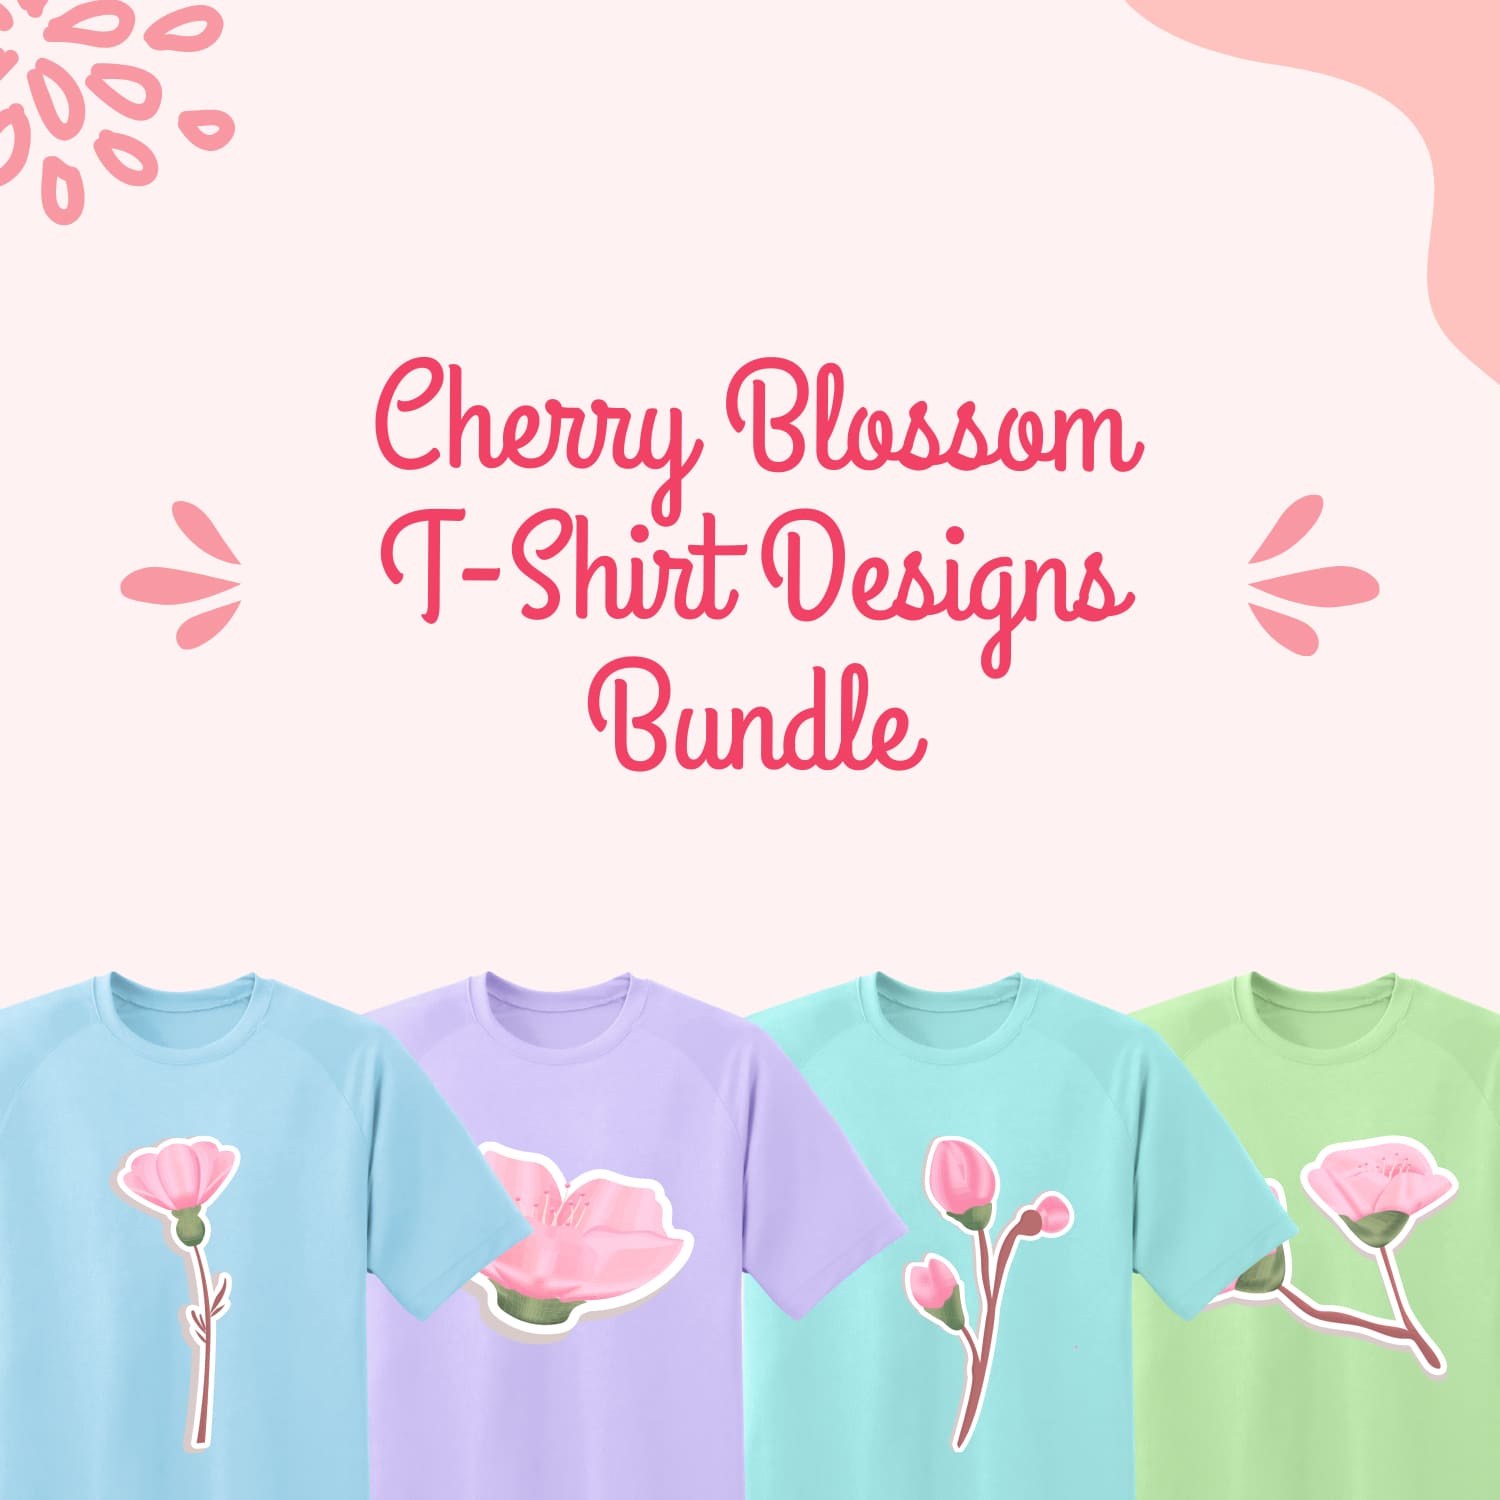 Preview many t-shorts with cherry blossom.